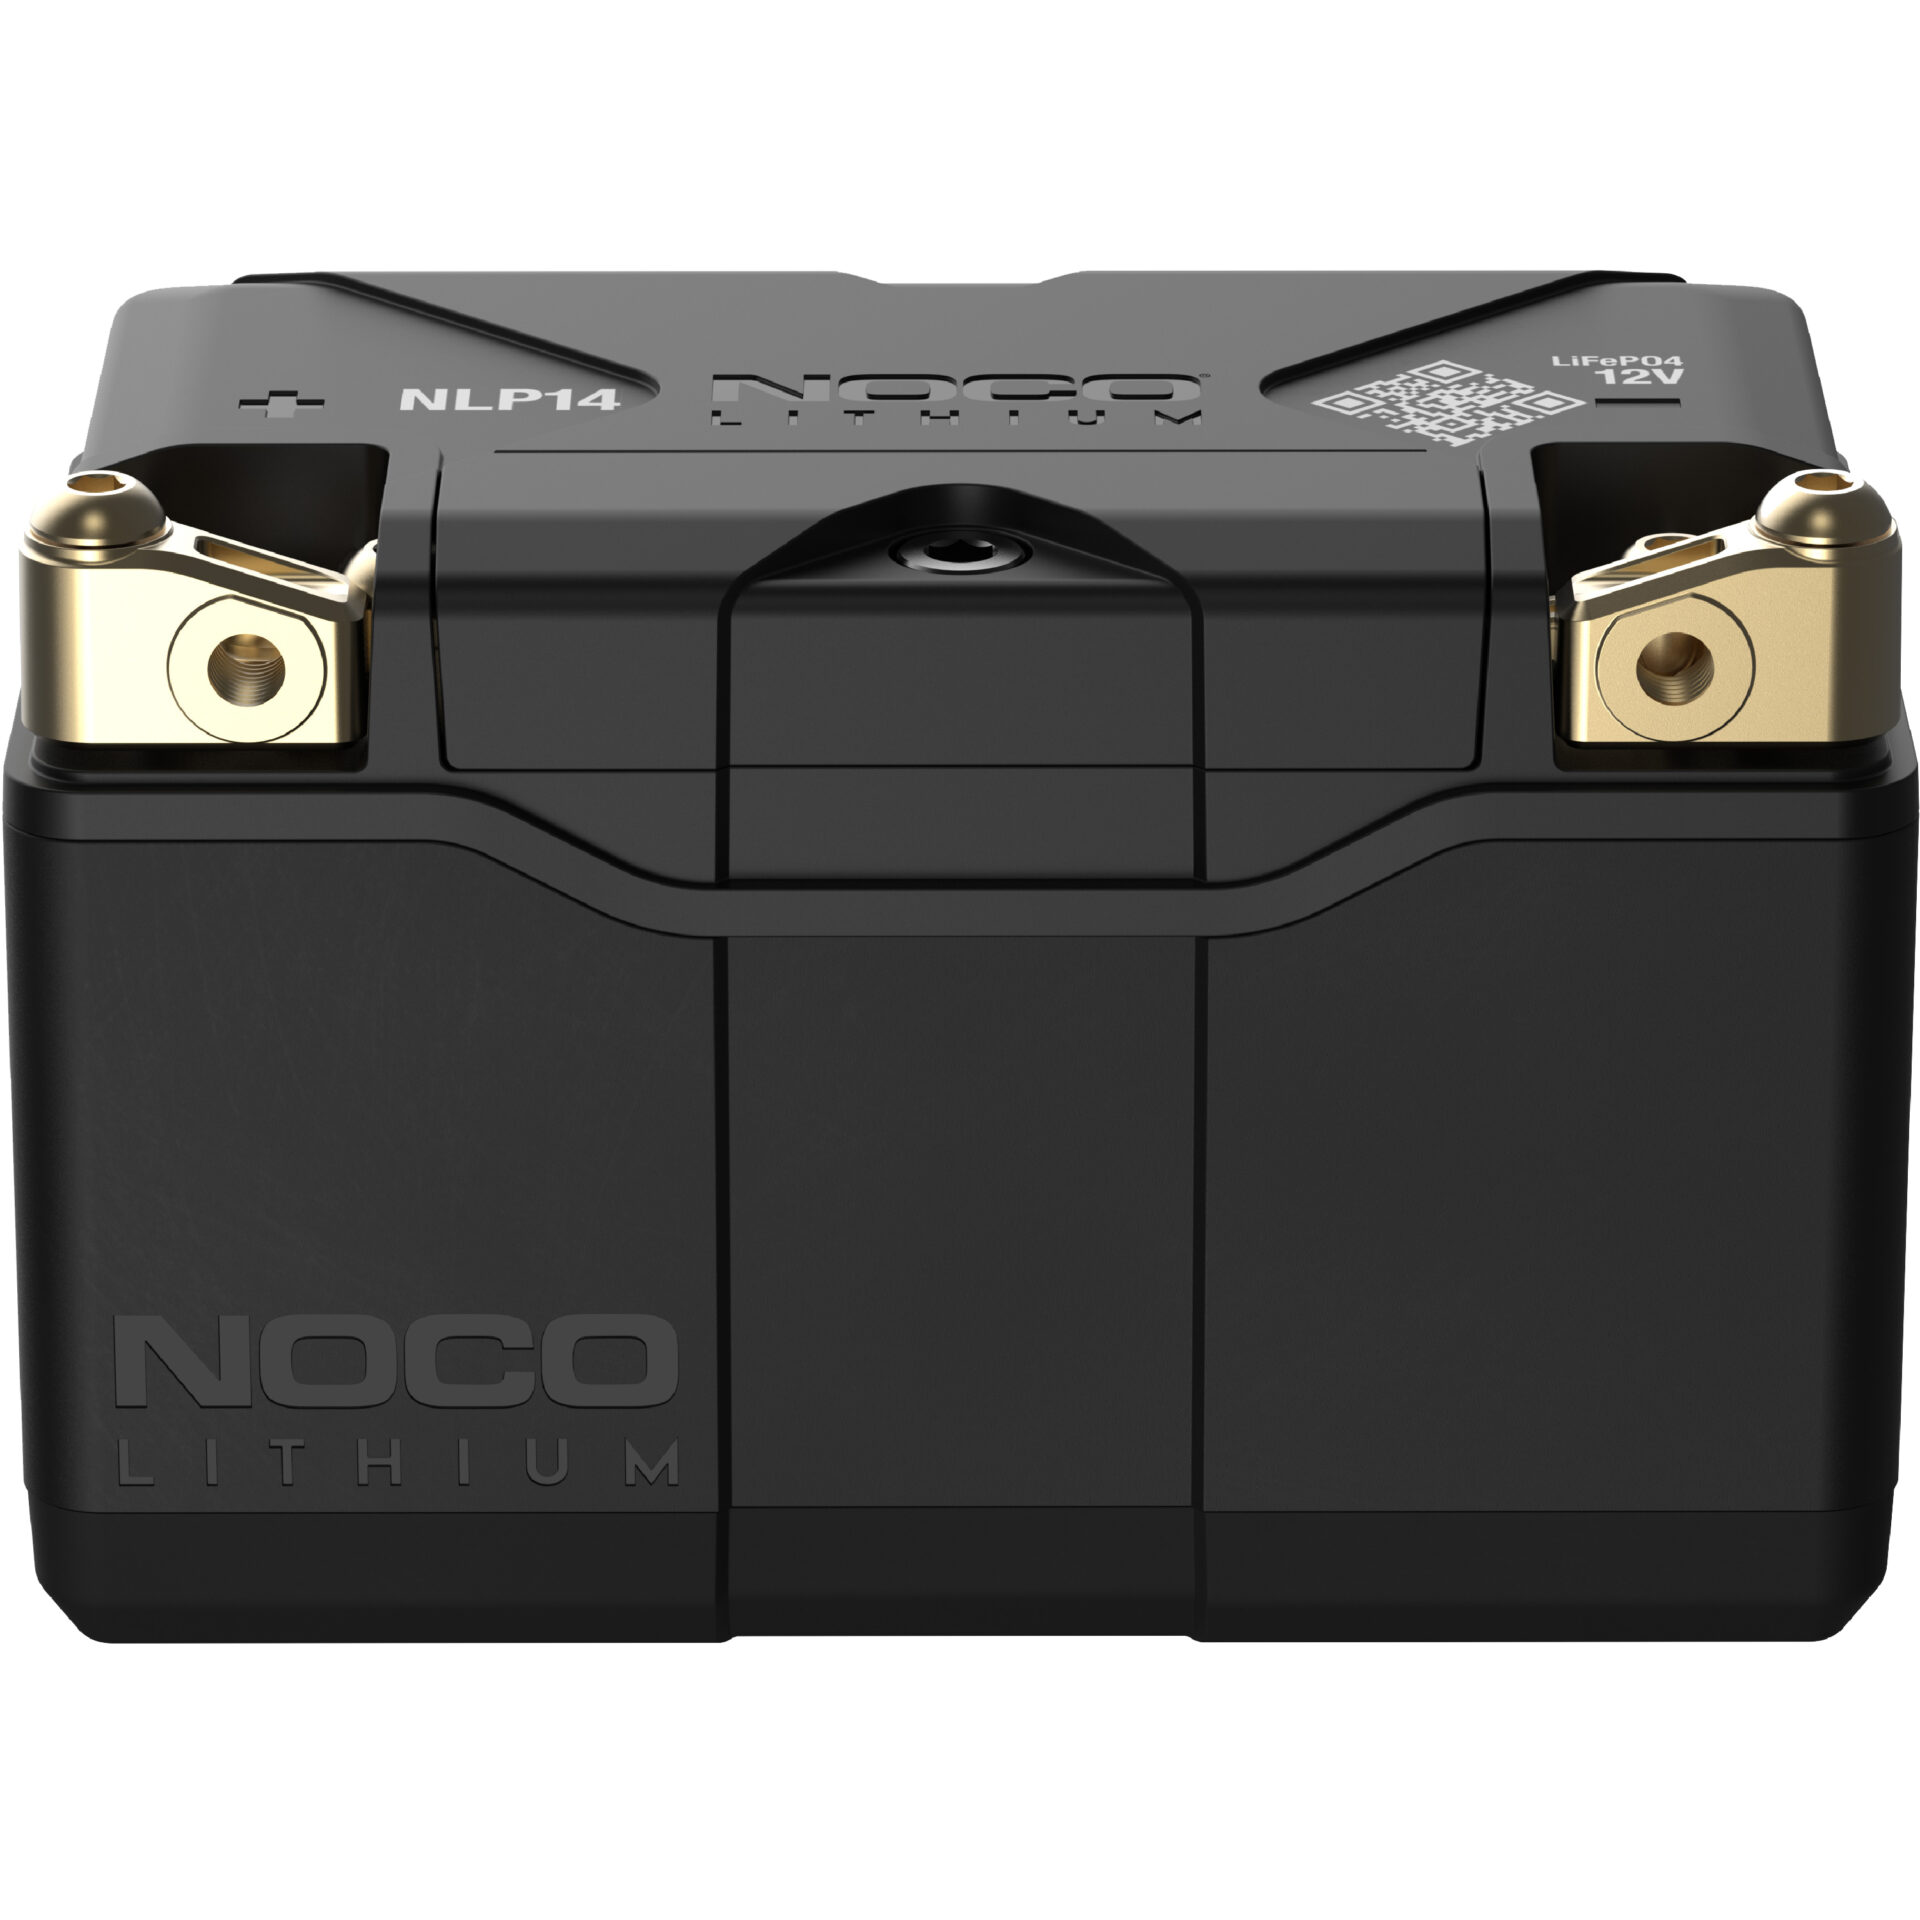 Noco Lithium Battery for powersports